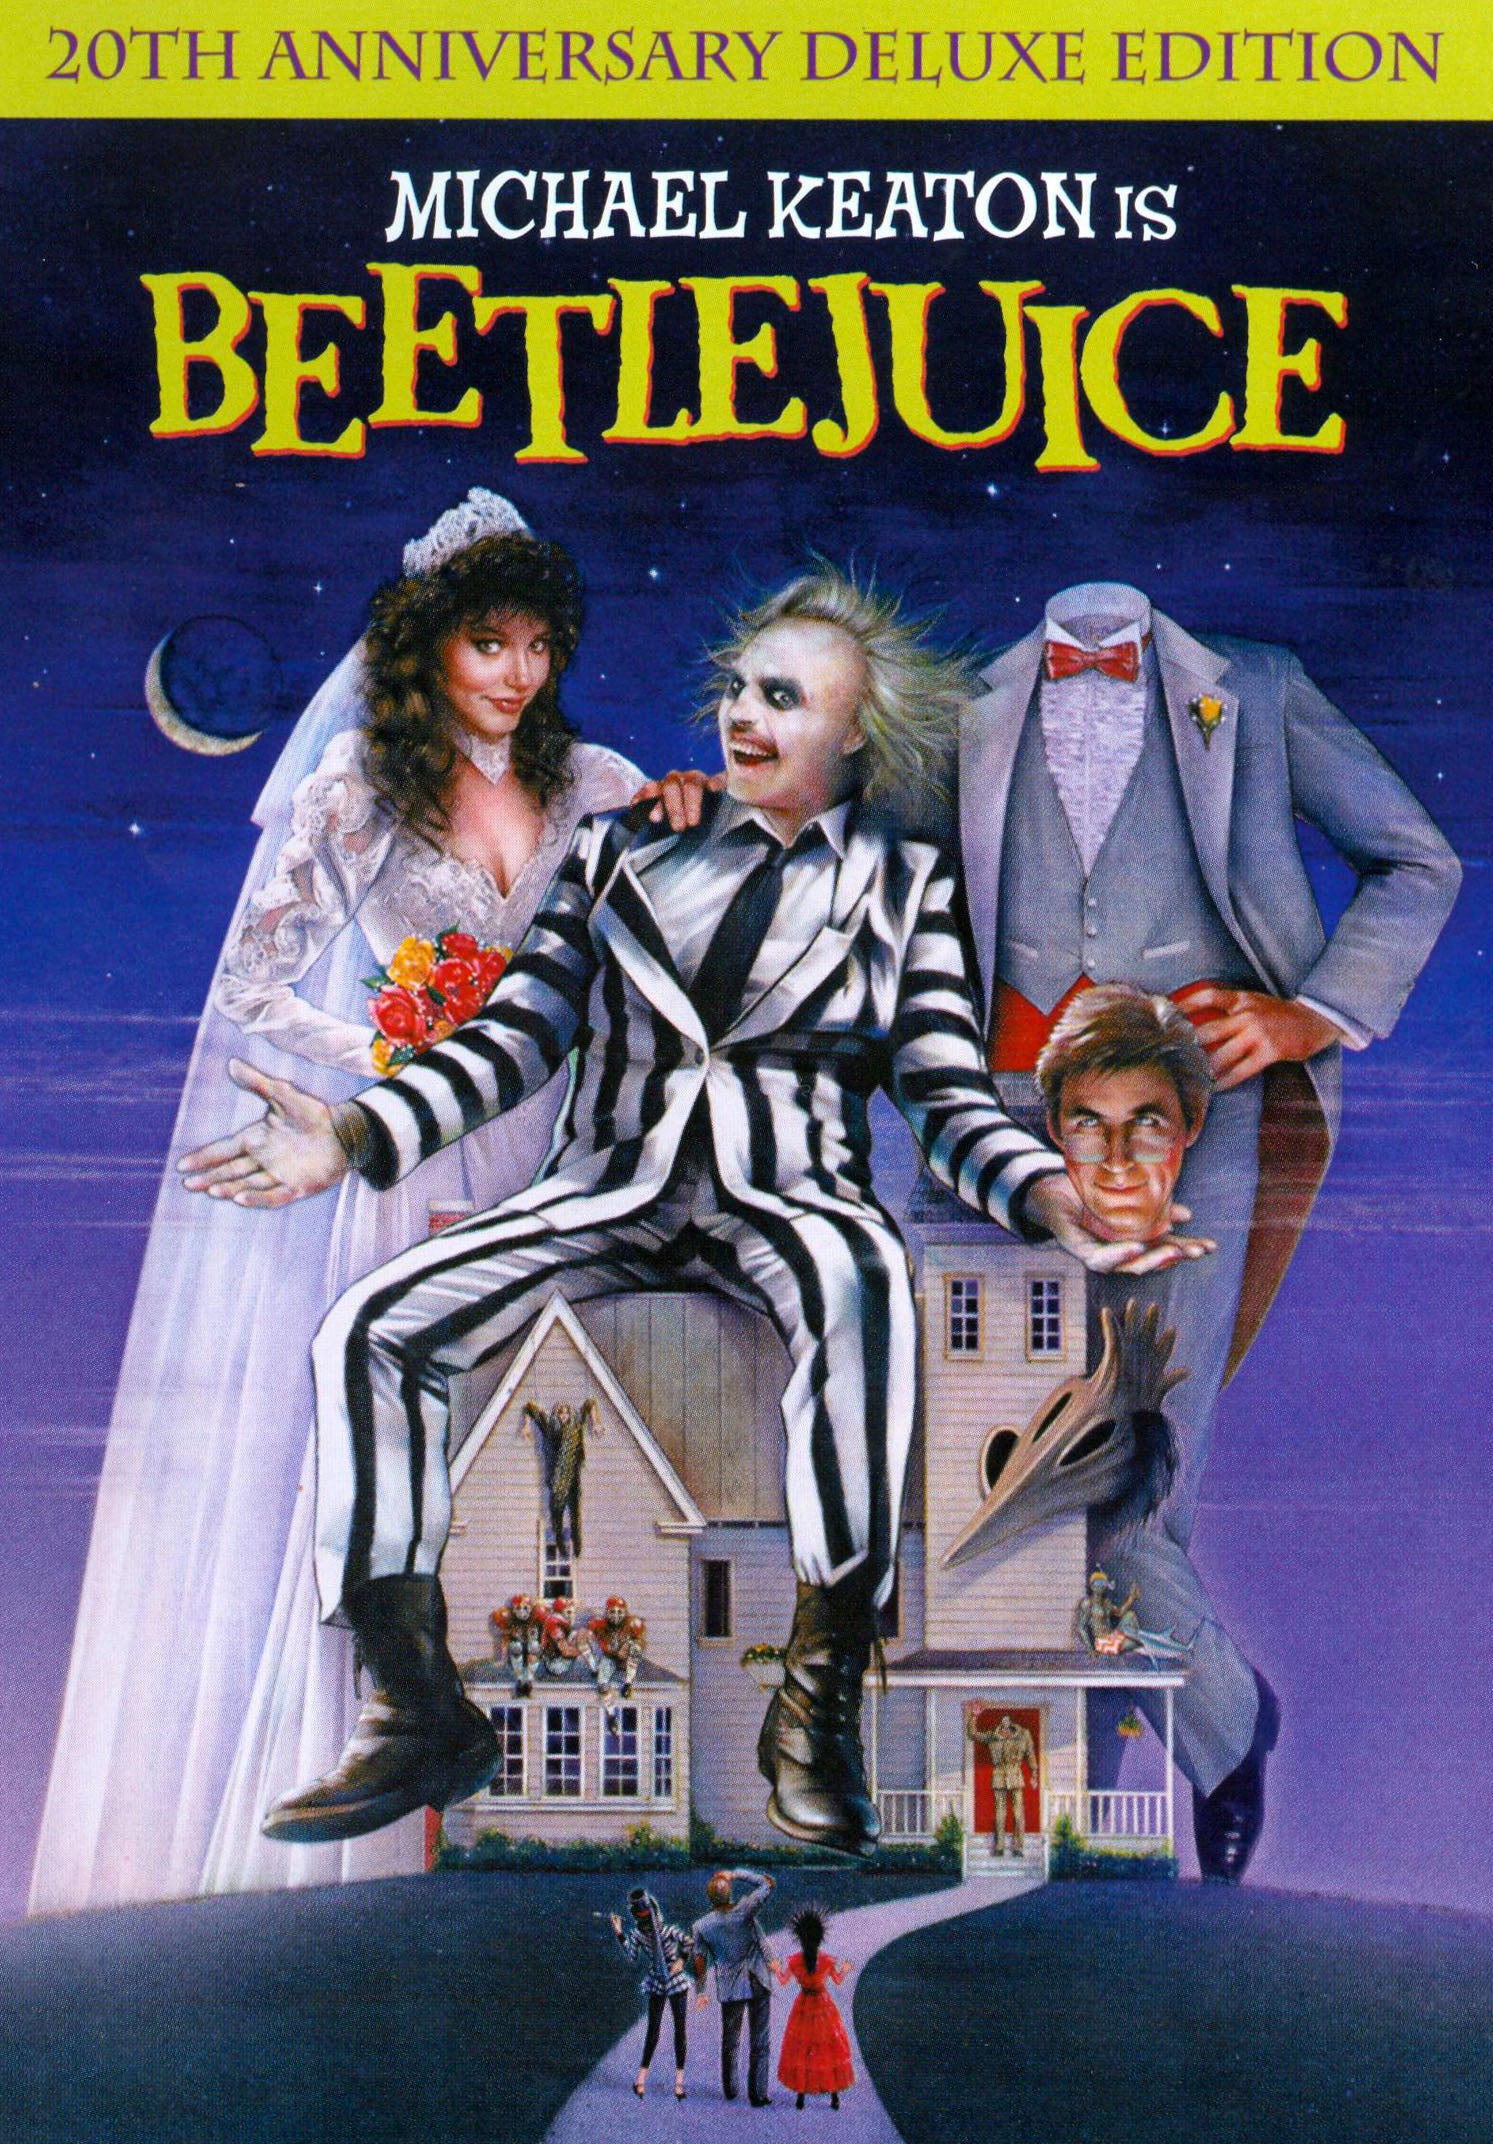 Beetlejuice [20th Anniversary Edition] [Deluxe Edition] cover art